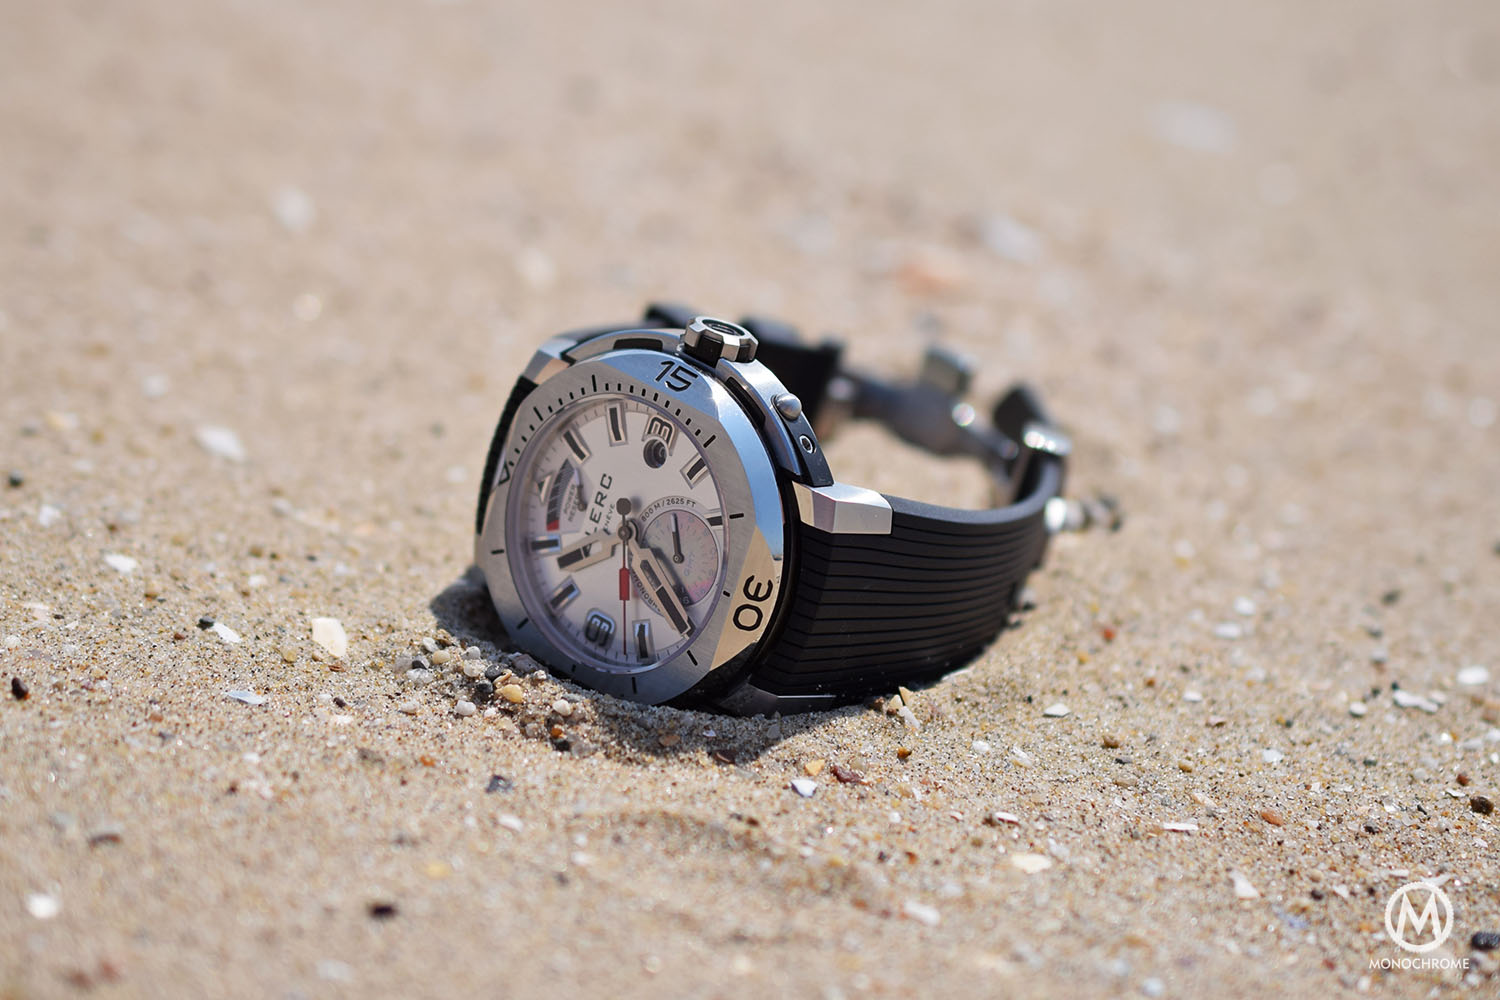 Overall appearance for Clerc dive watch